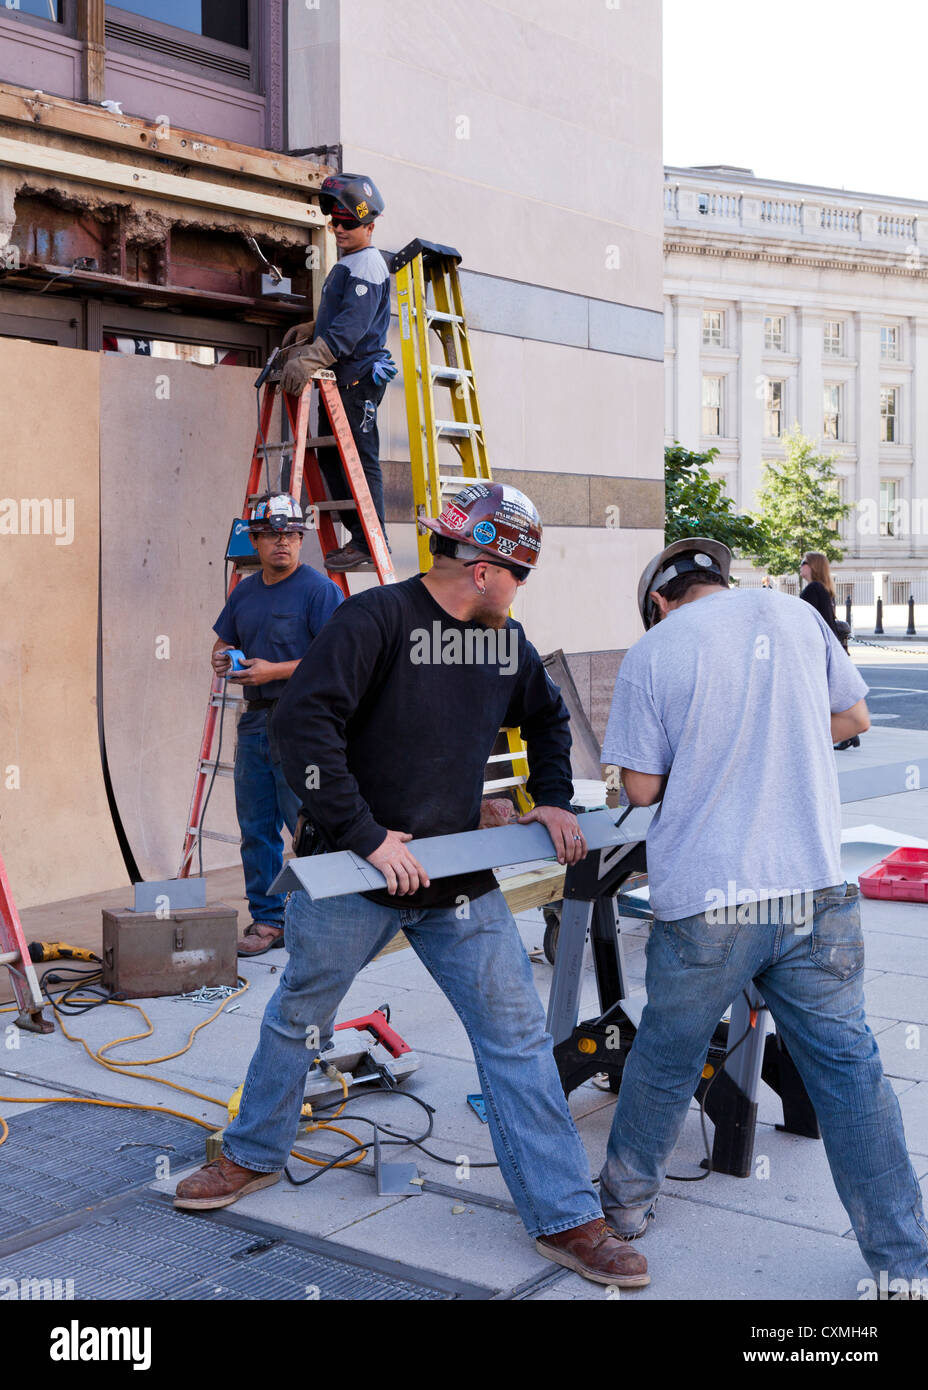 Construction workers repairing exterior of building - Washington, DC USA Stock Photo